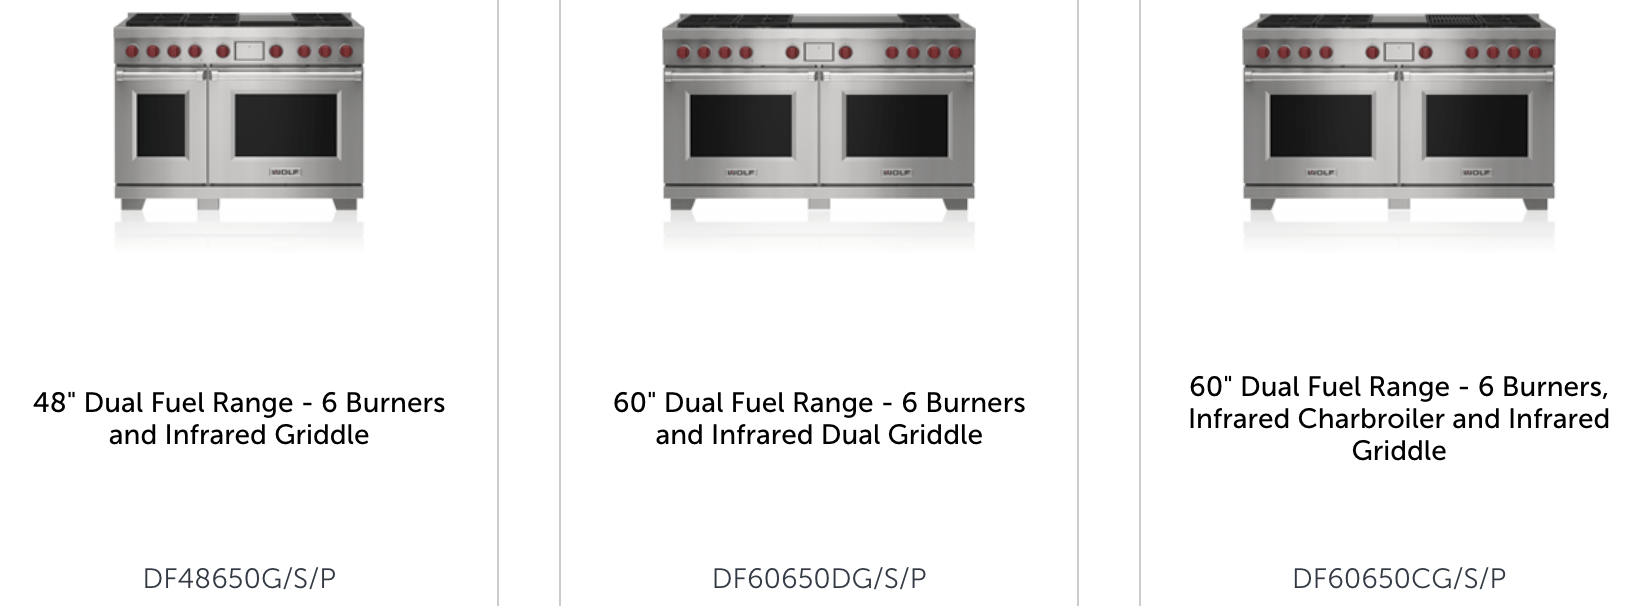 DF48650GSP by Wolf - 48 Dual Fuel Range - 6 Burners and Infrared